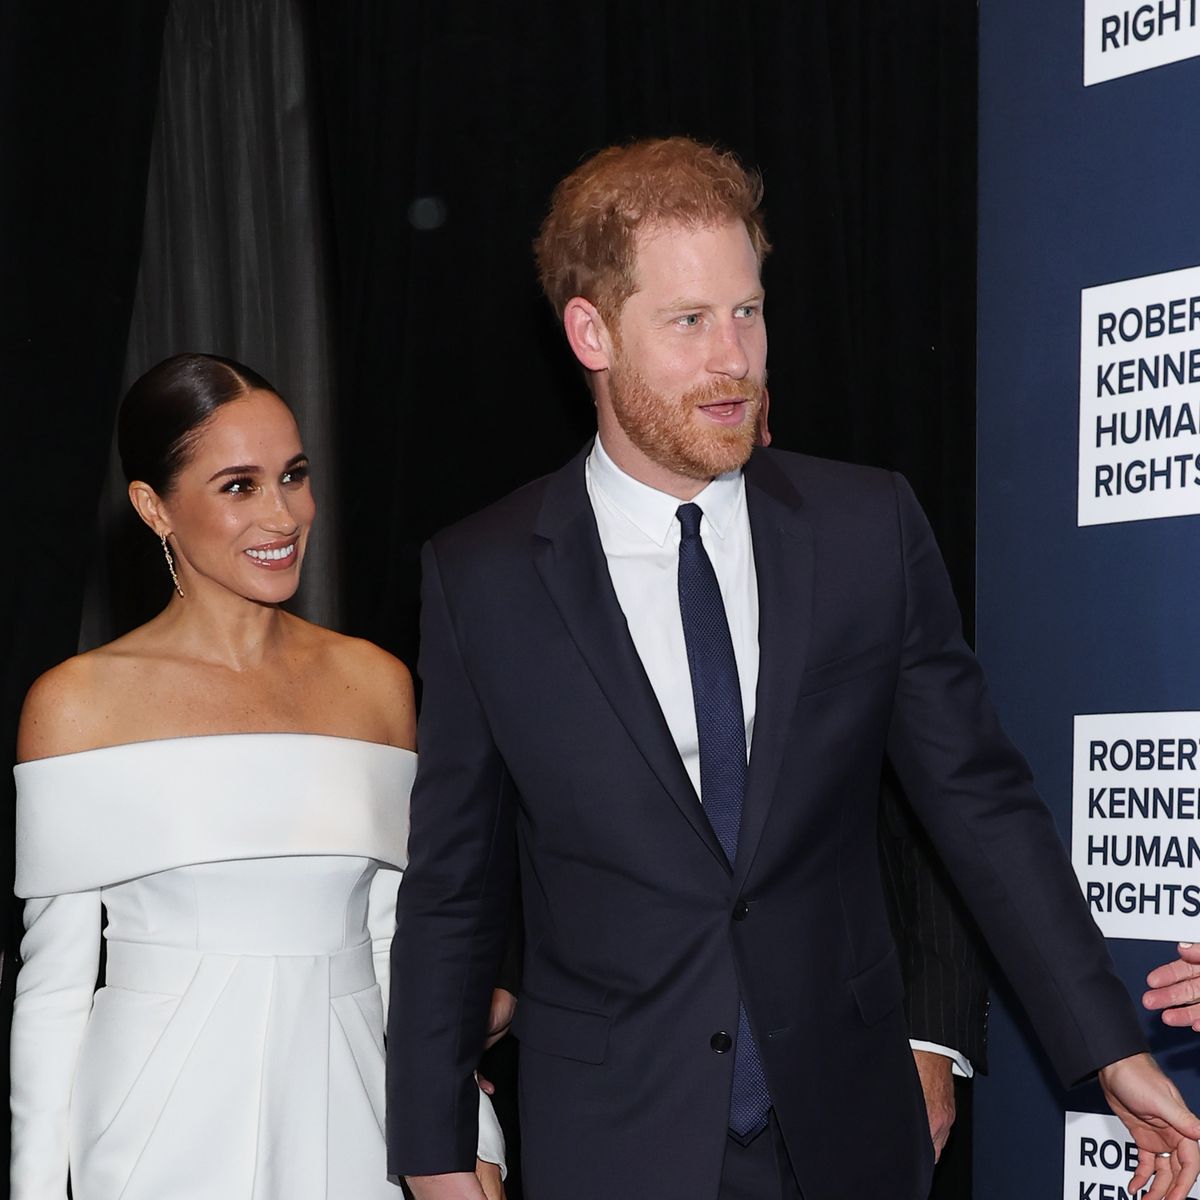 Meghan looks timeless in a white Louis Vuitton gown